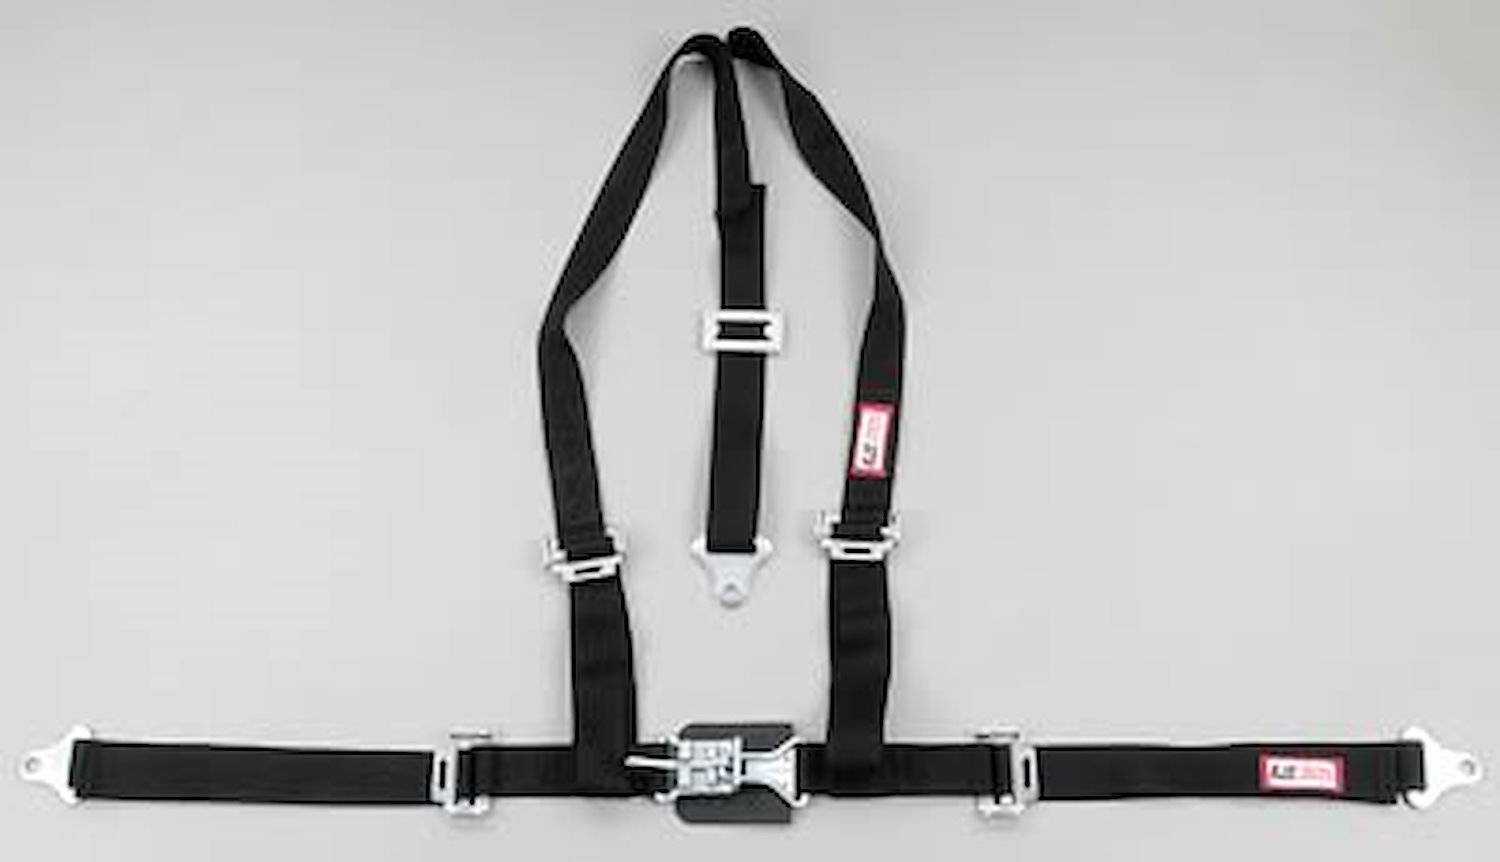 NON-SFI L&L HARNESS 3 PULL UP Lap Belt SNAP SEWN IN 2 S.H. Individual ROLL BAR Mount w/STERNUM STRAP WRAP/SNAP ORANGE